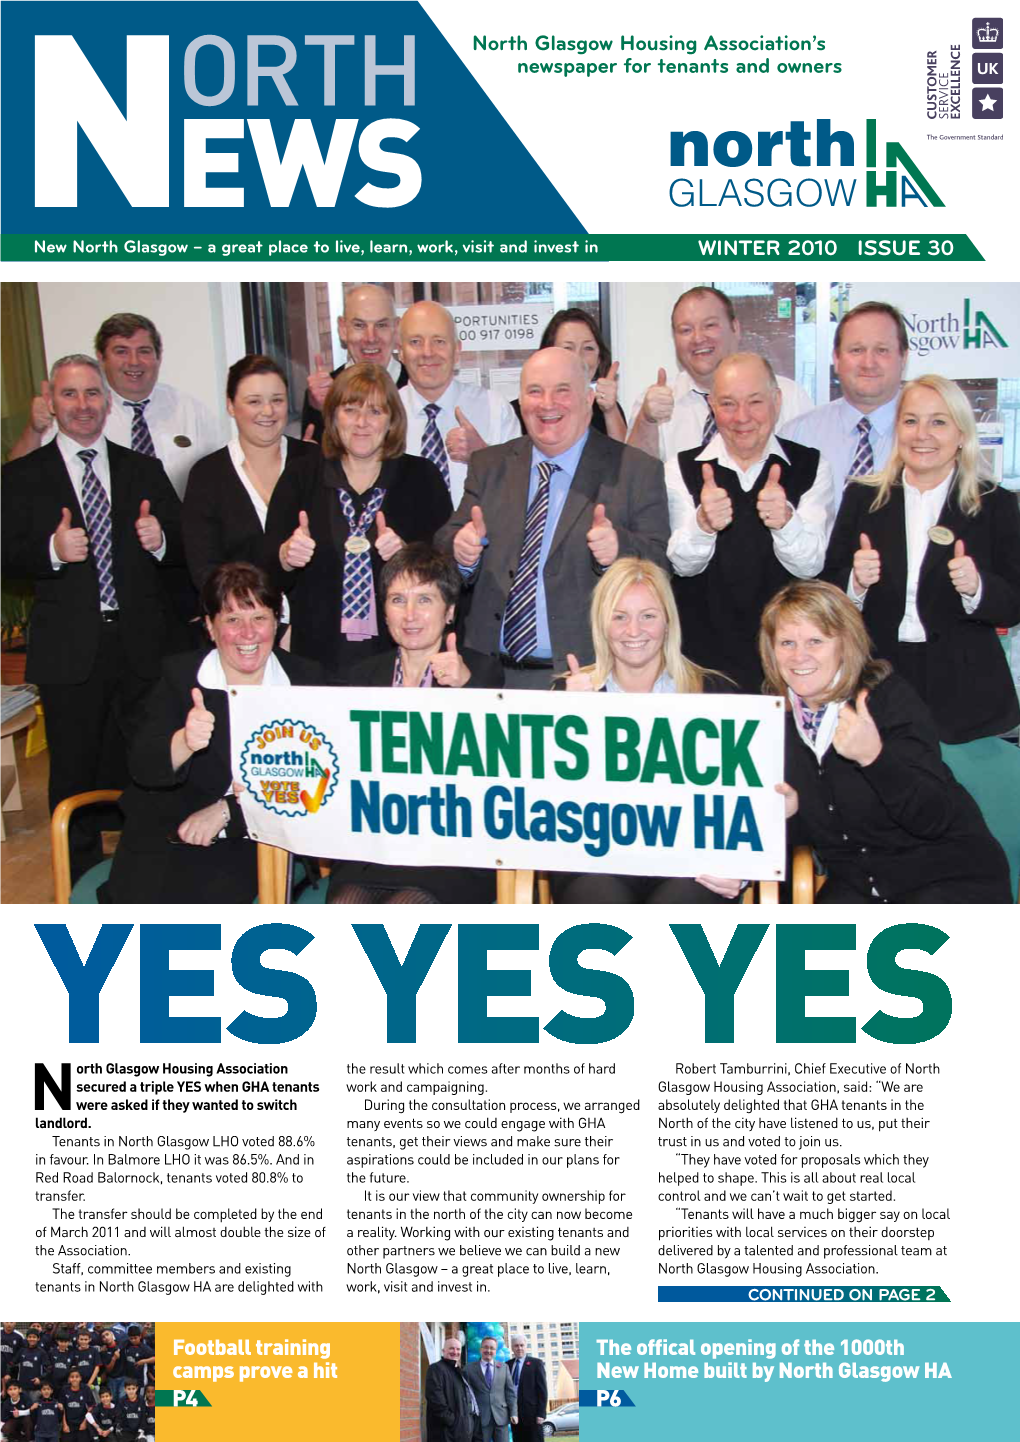 North Glasgow Housing Association's Newspaper for Tenants and Owners